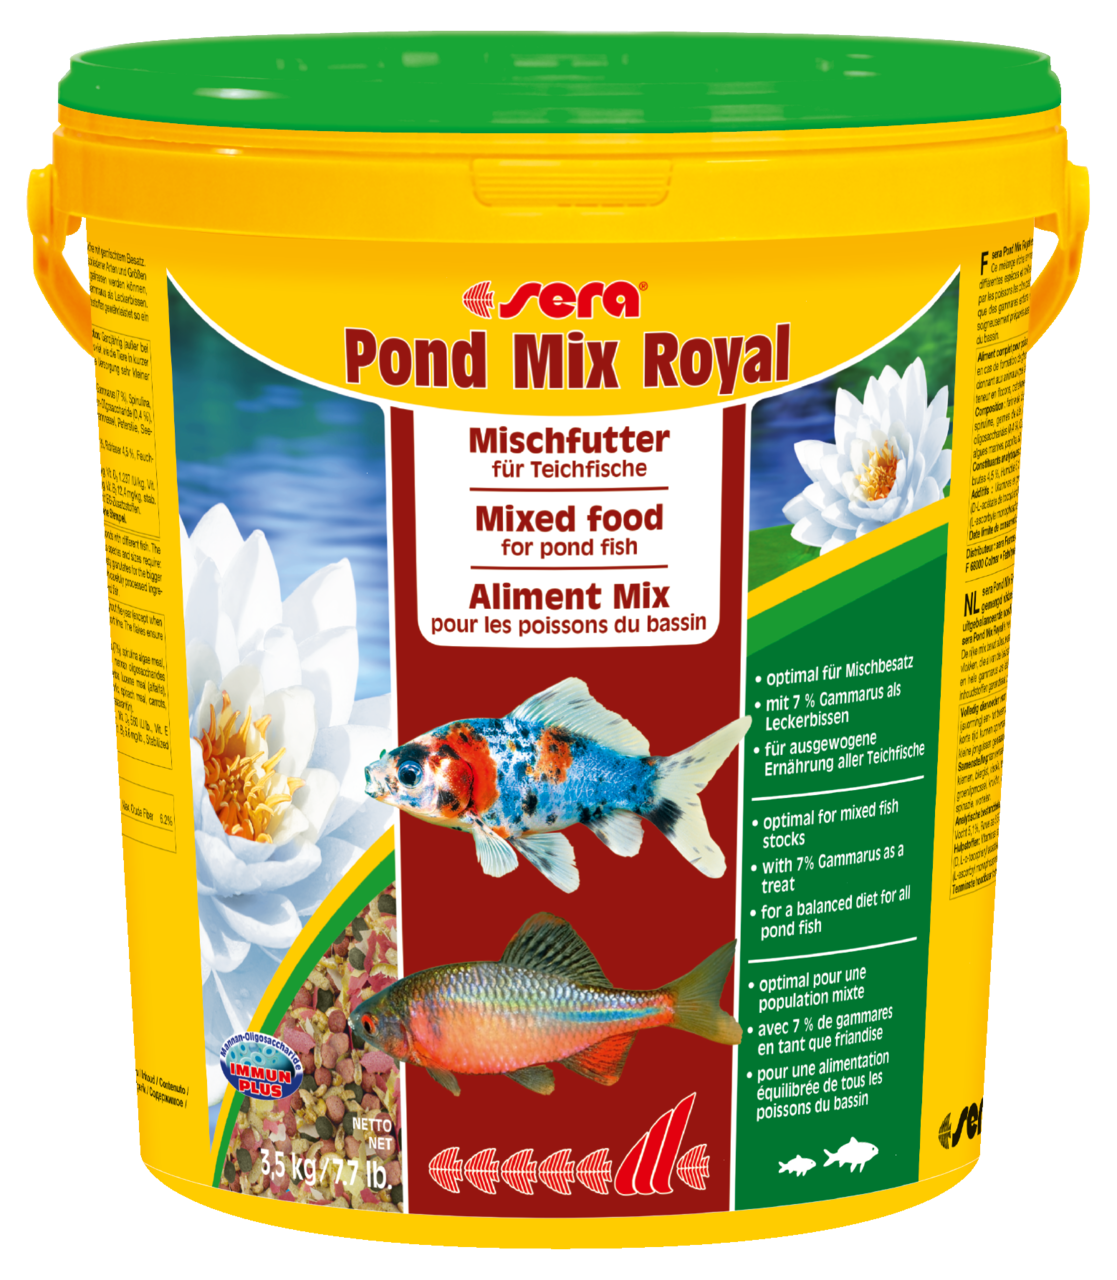 pond mix royal 3.5 kg + product picture